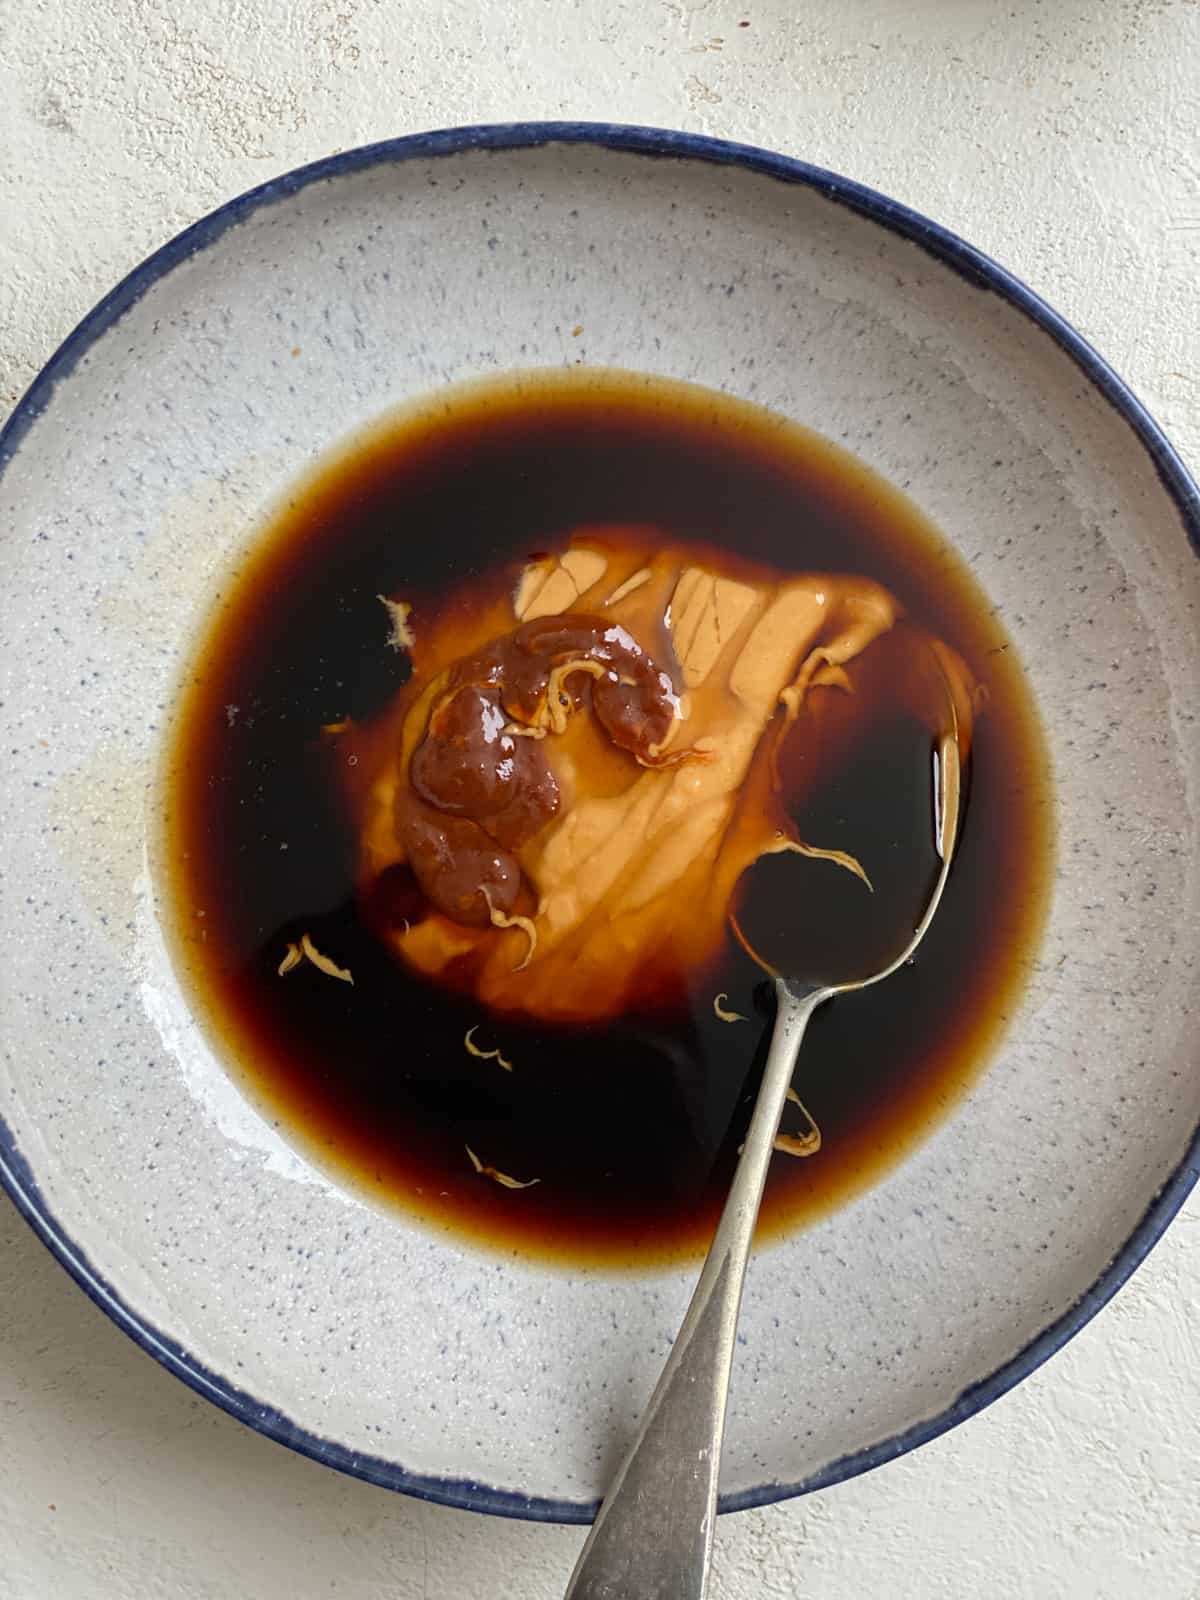 process of mixing peanut butter and soy sauce in a bowl